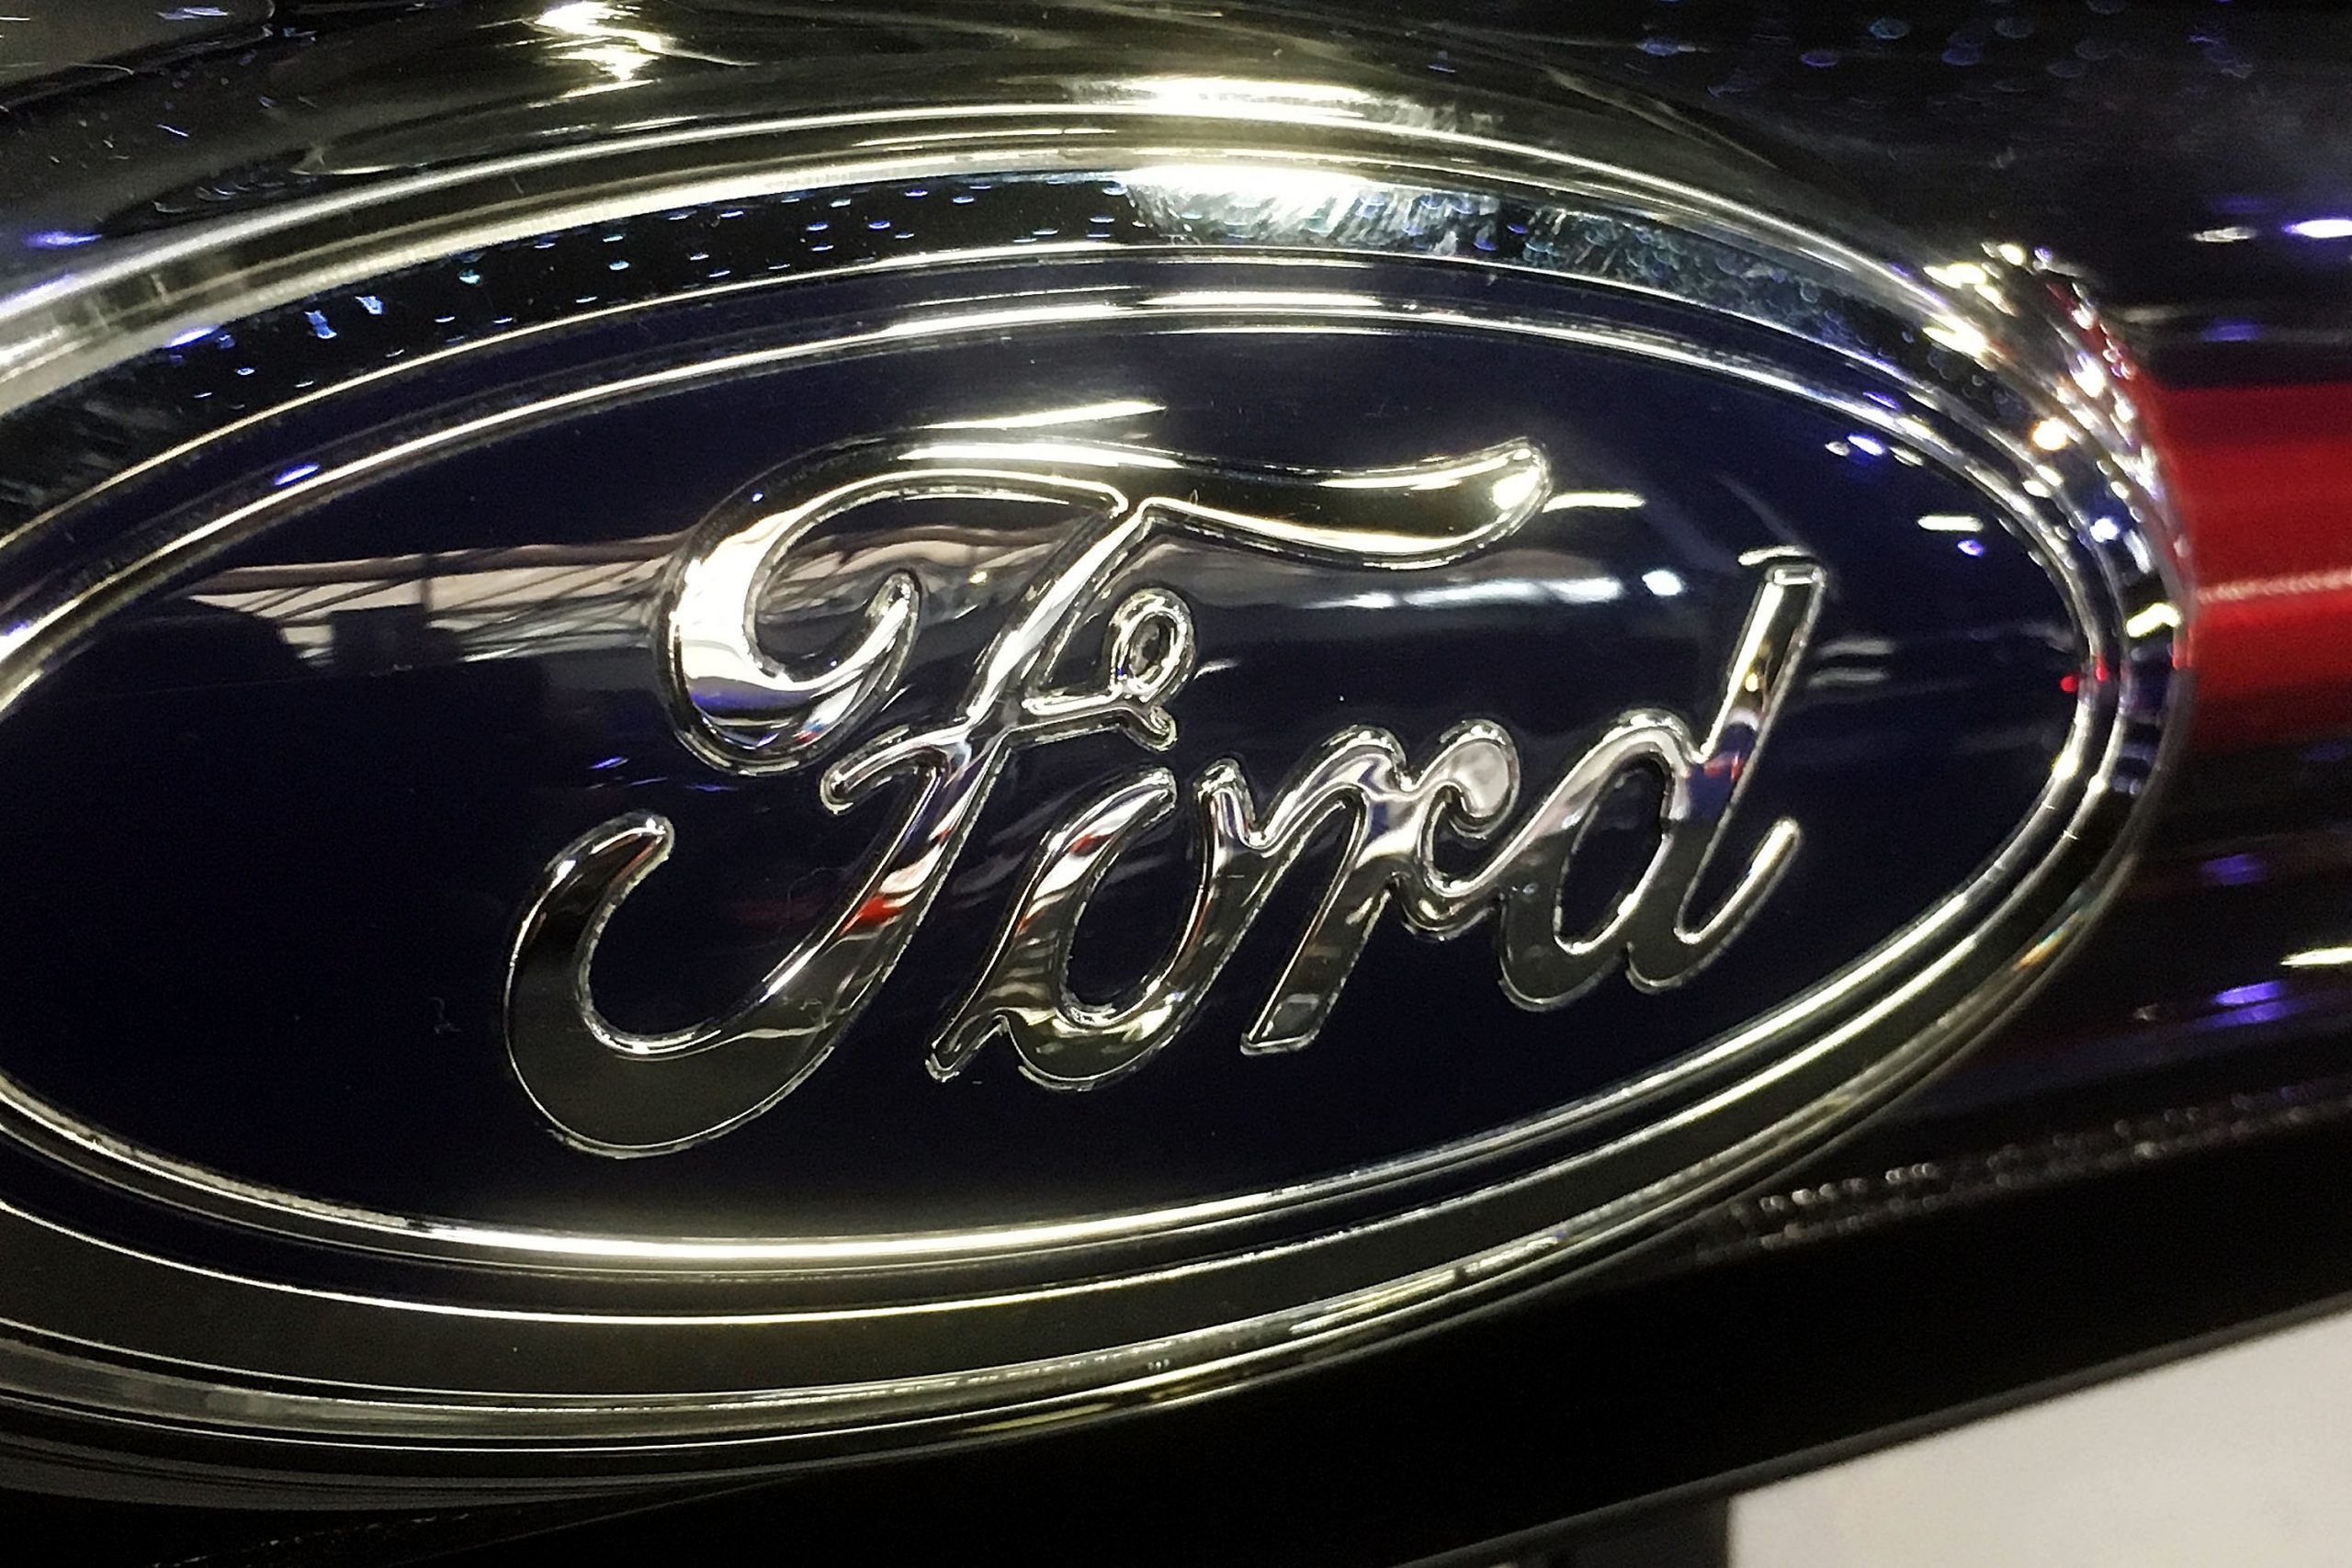 The Ford logo badge adorns a Ford car during the 2016 London Motor Show. The 2022 Ford Maverick is set to don the same badge next year